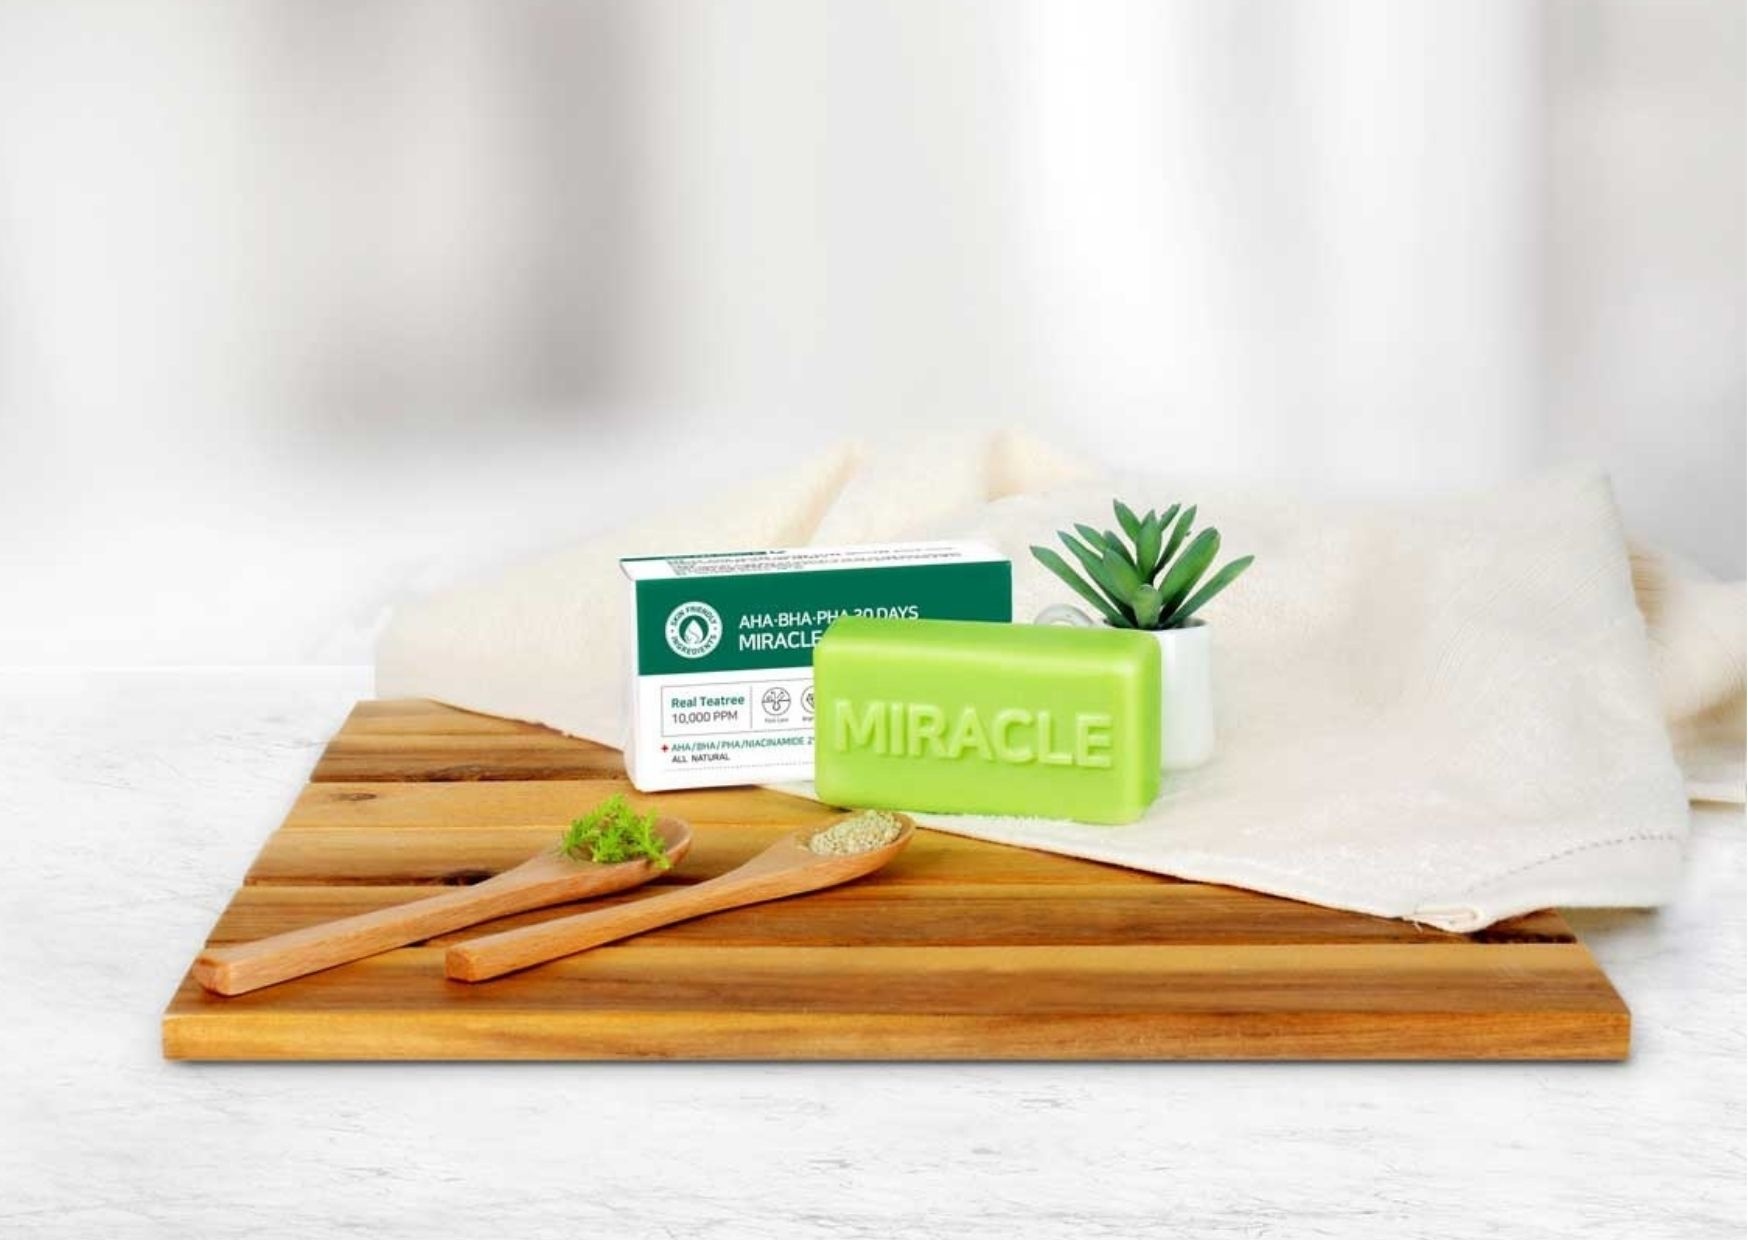 Some By Mi AHA BHA PHA 30 Days Miracle Cleansing Bar